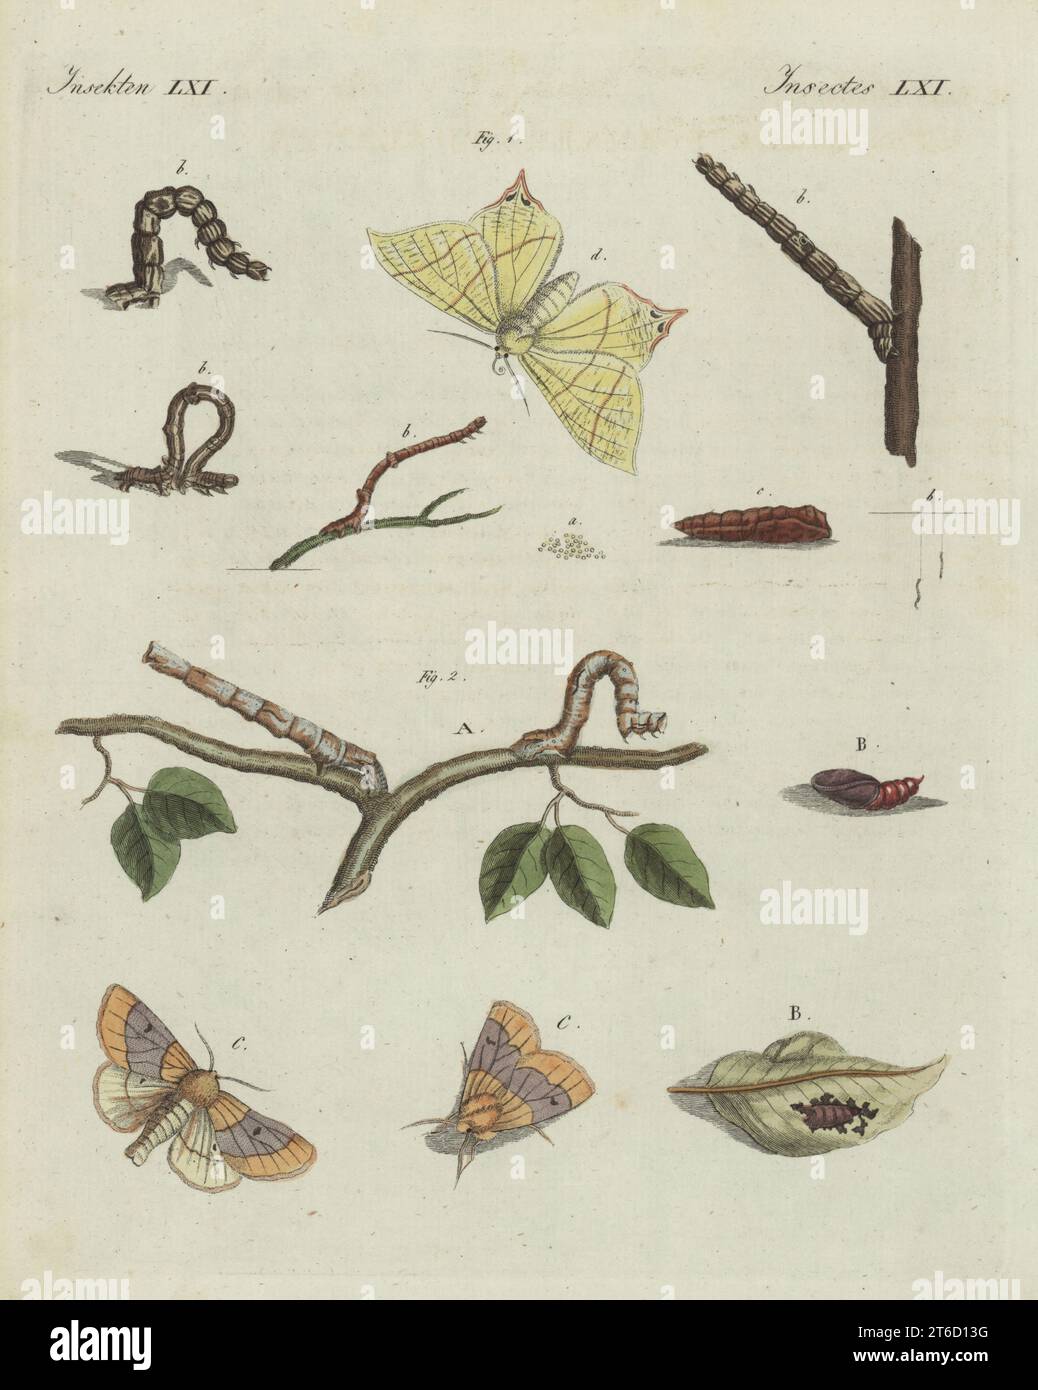 Swallow-tailed moth, Ourapteryx sambucaria 1, and scalloped oak, Crocallis elinguaria 2. With caterpillar and pupa. Handcoloured copperplate engraving from Carl Bertuch's Bilderbuch fur Kinder (Picture Book for Children), Weimar, 1810. A 12-volume encyclopedia for children illustrated with almost 1,200 engraved plates on natural history, science, costume, mythology, etc., published from 1790-1830. Stock Photo